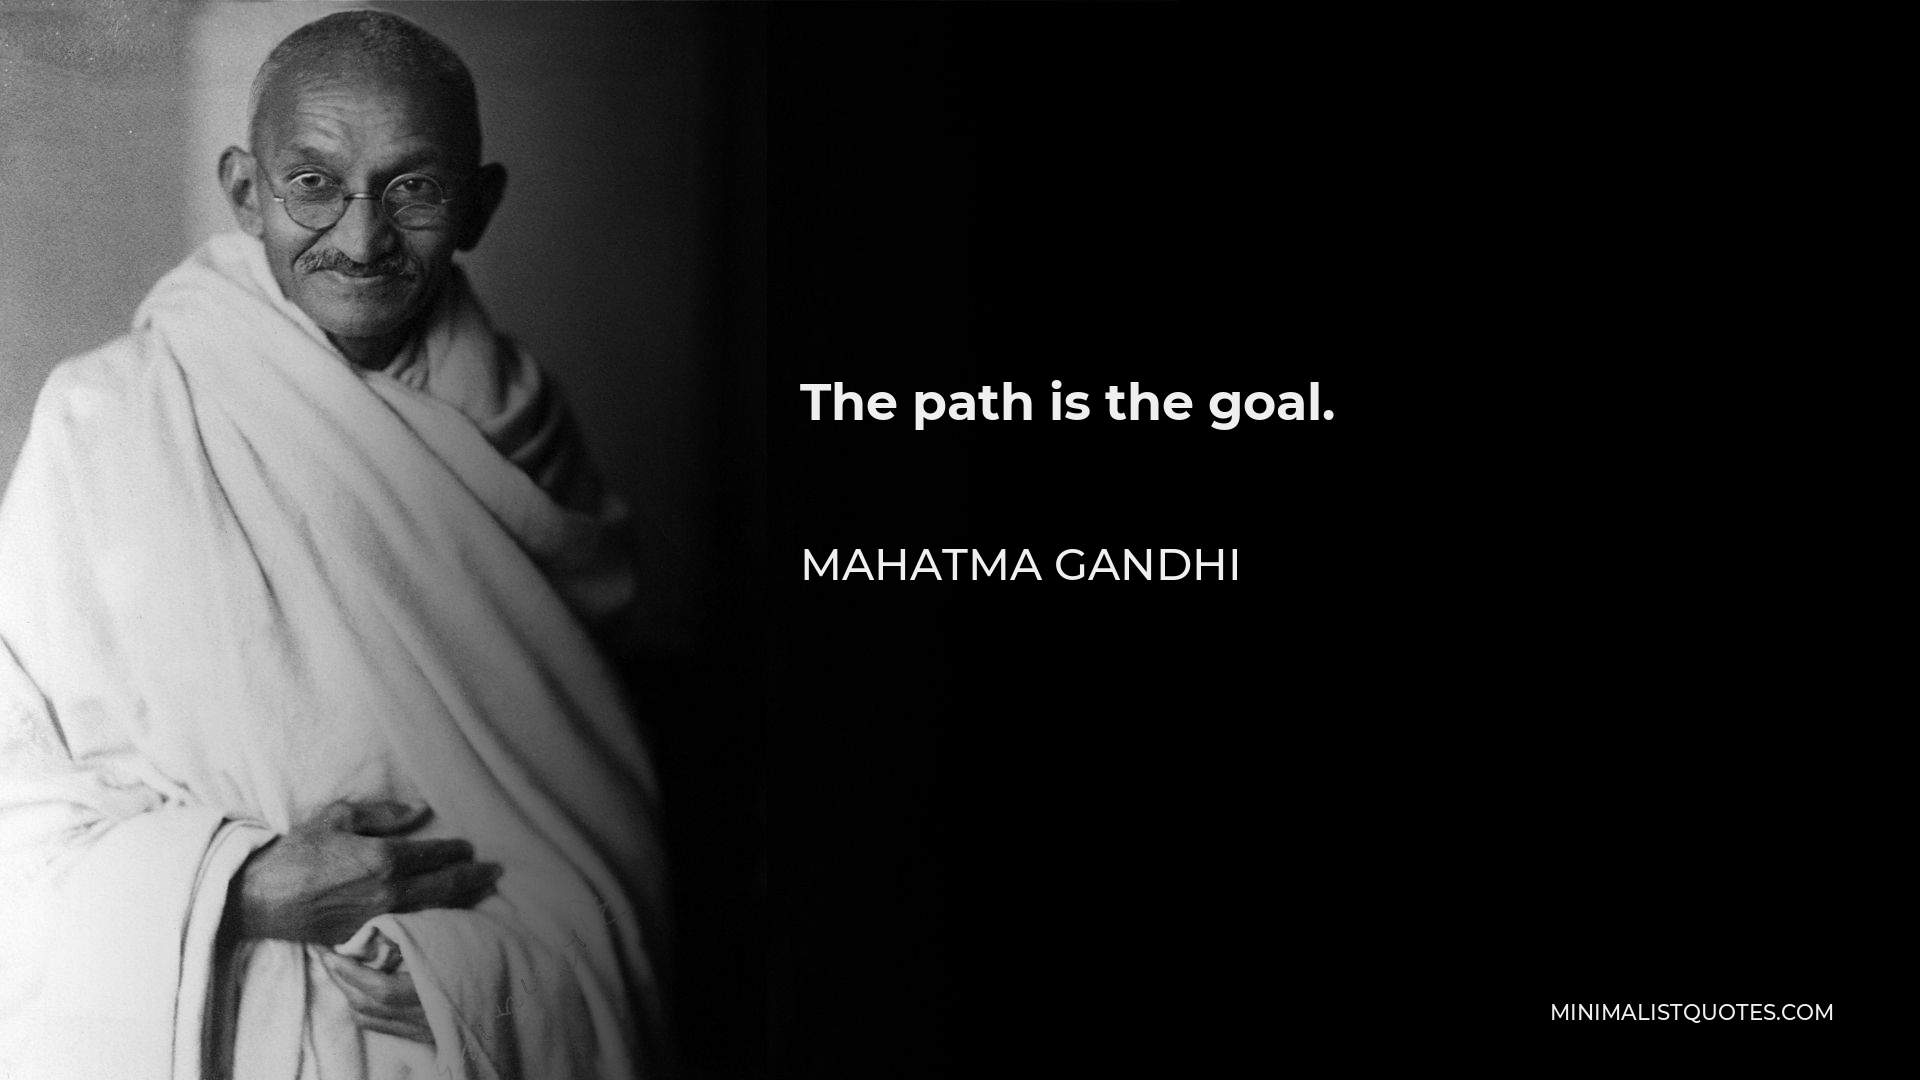 Mahatma Gandhi Quote - The path is the goal.